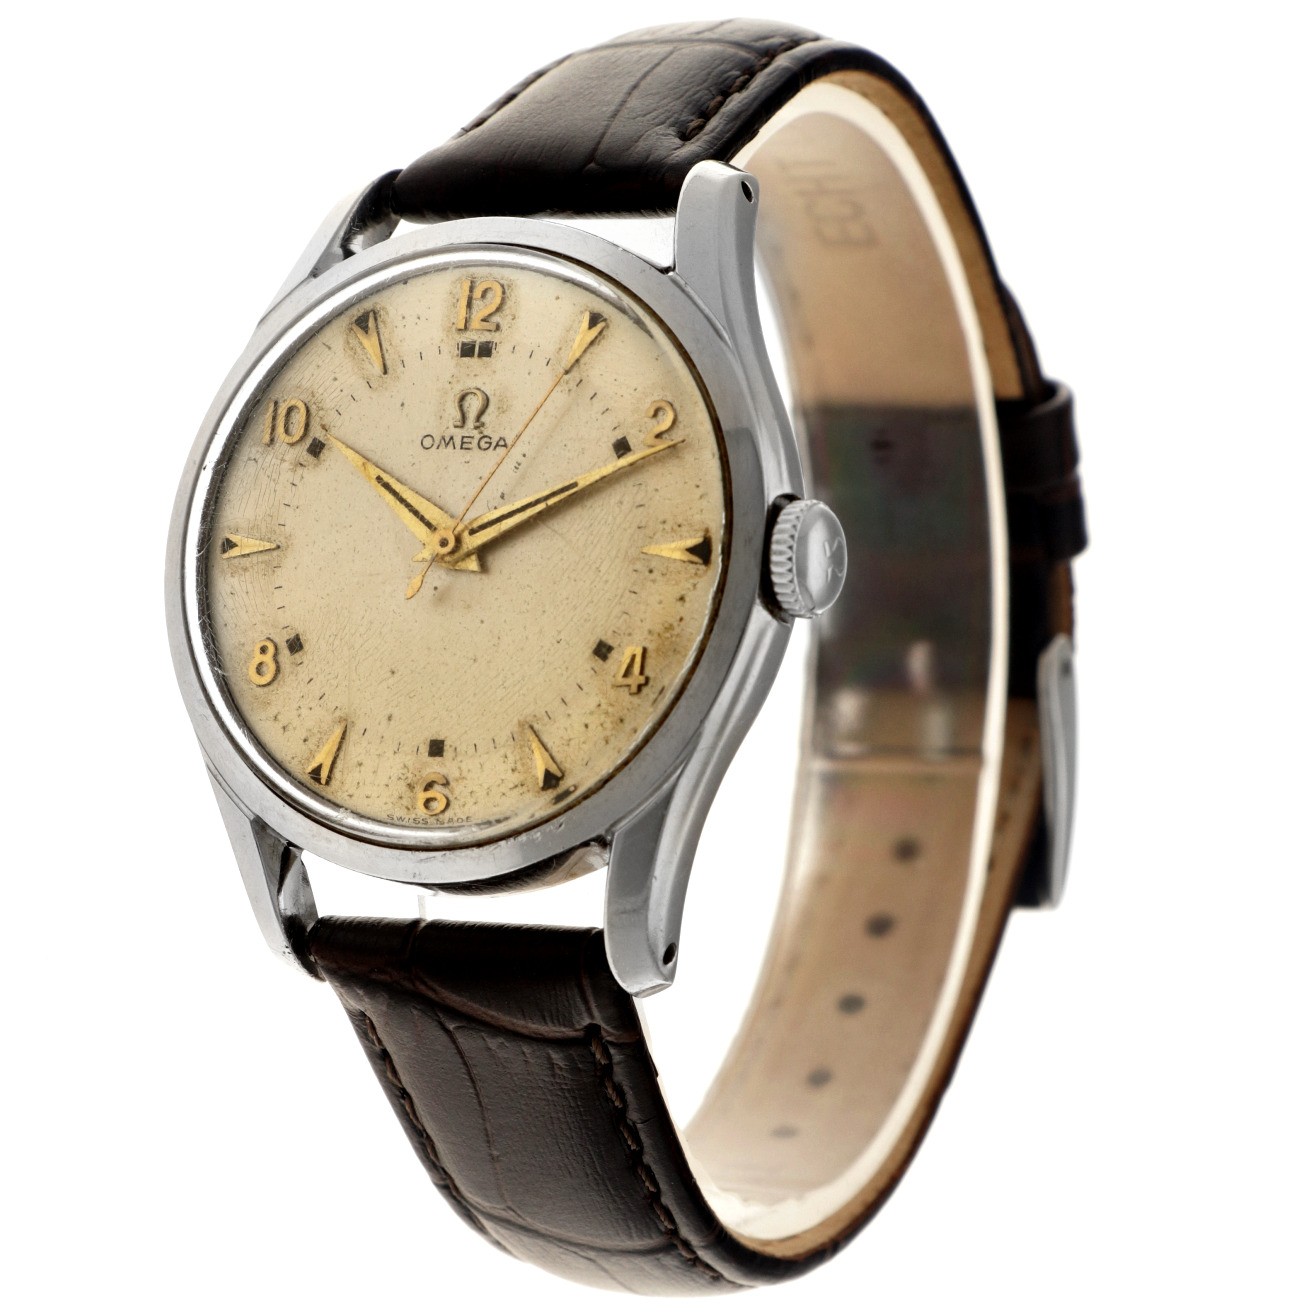 No Reserve - Omega Cal. 283 2640-8 - Men's watch - approx. 1952. - Image 2 of 6